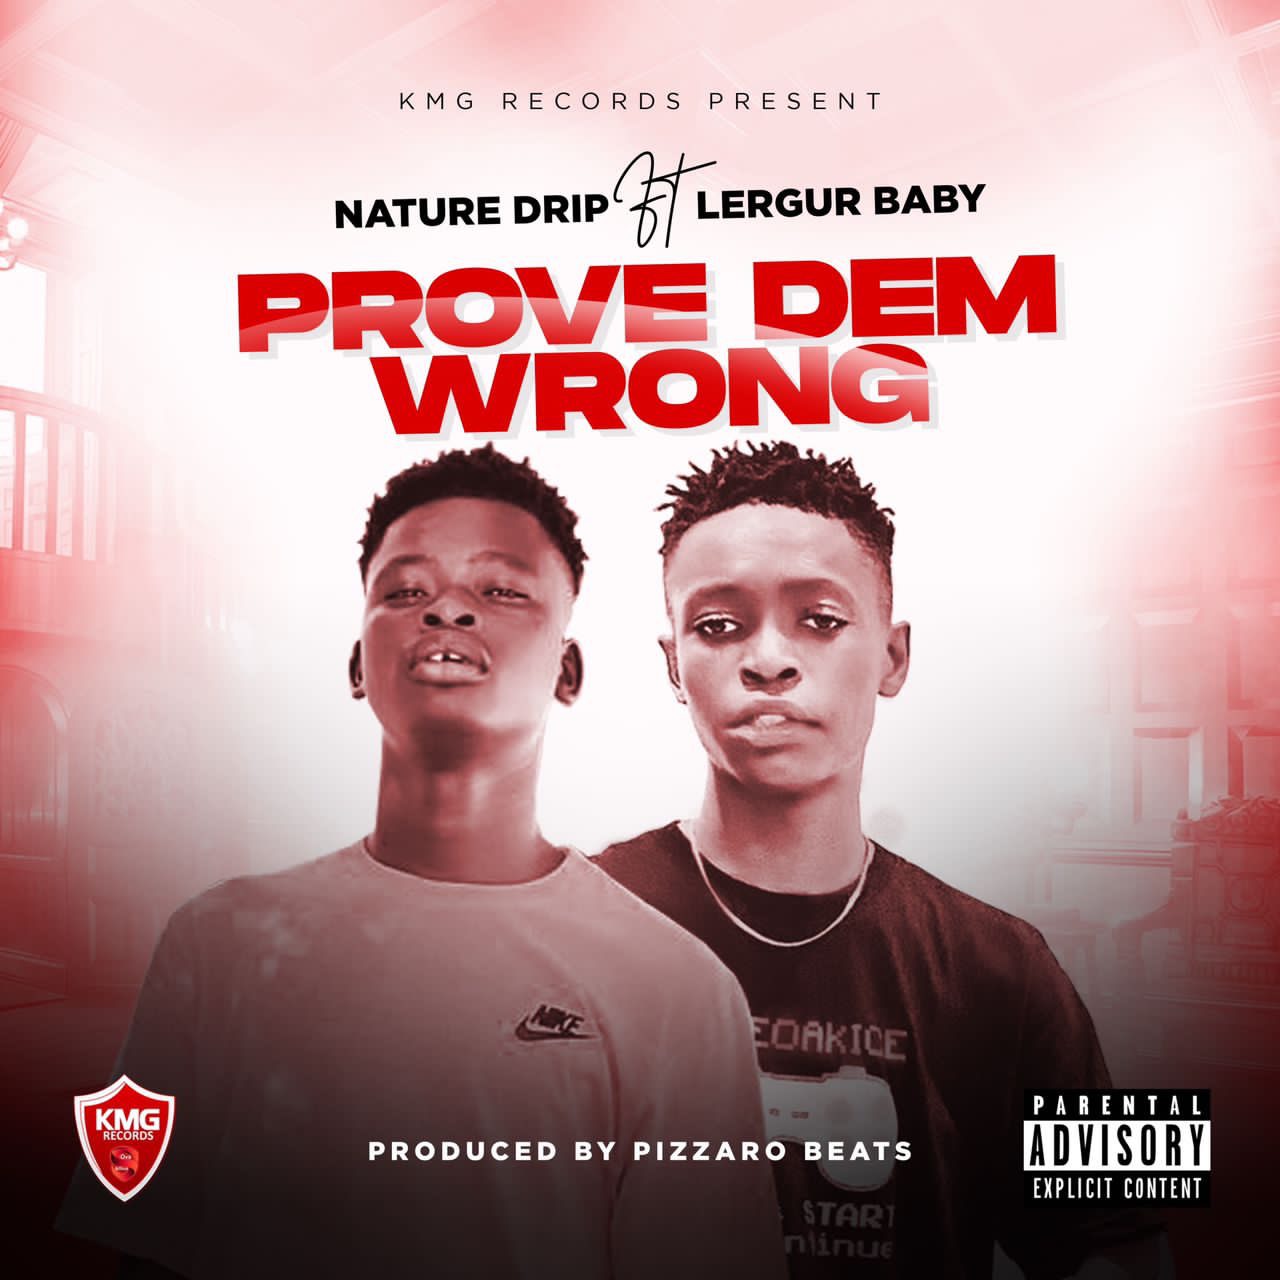 Nature Drip Goes Motivational On New Song “Prove Dem Wrong” Featuring Lergur Baby.